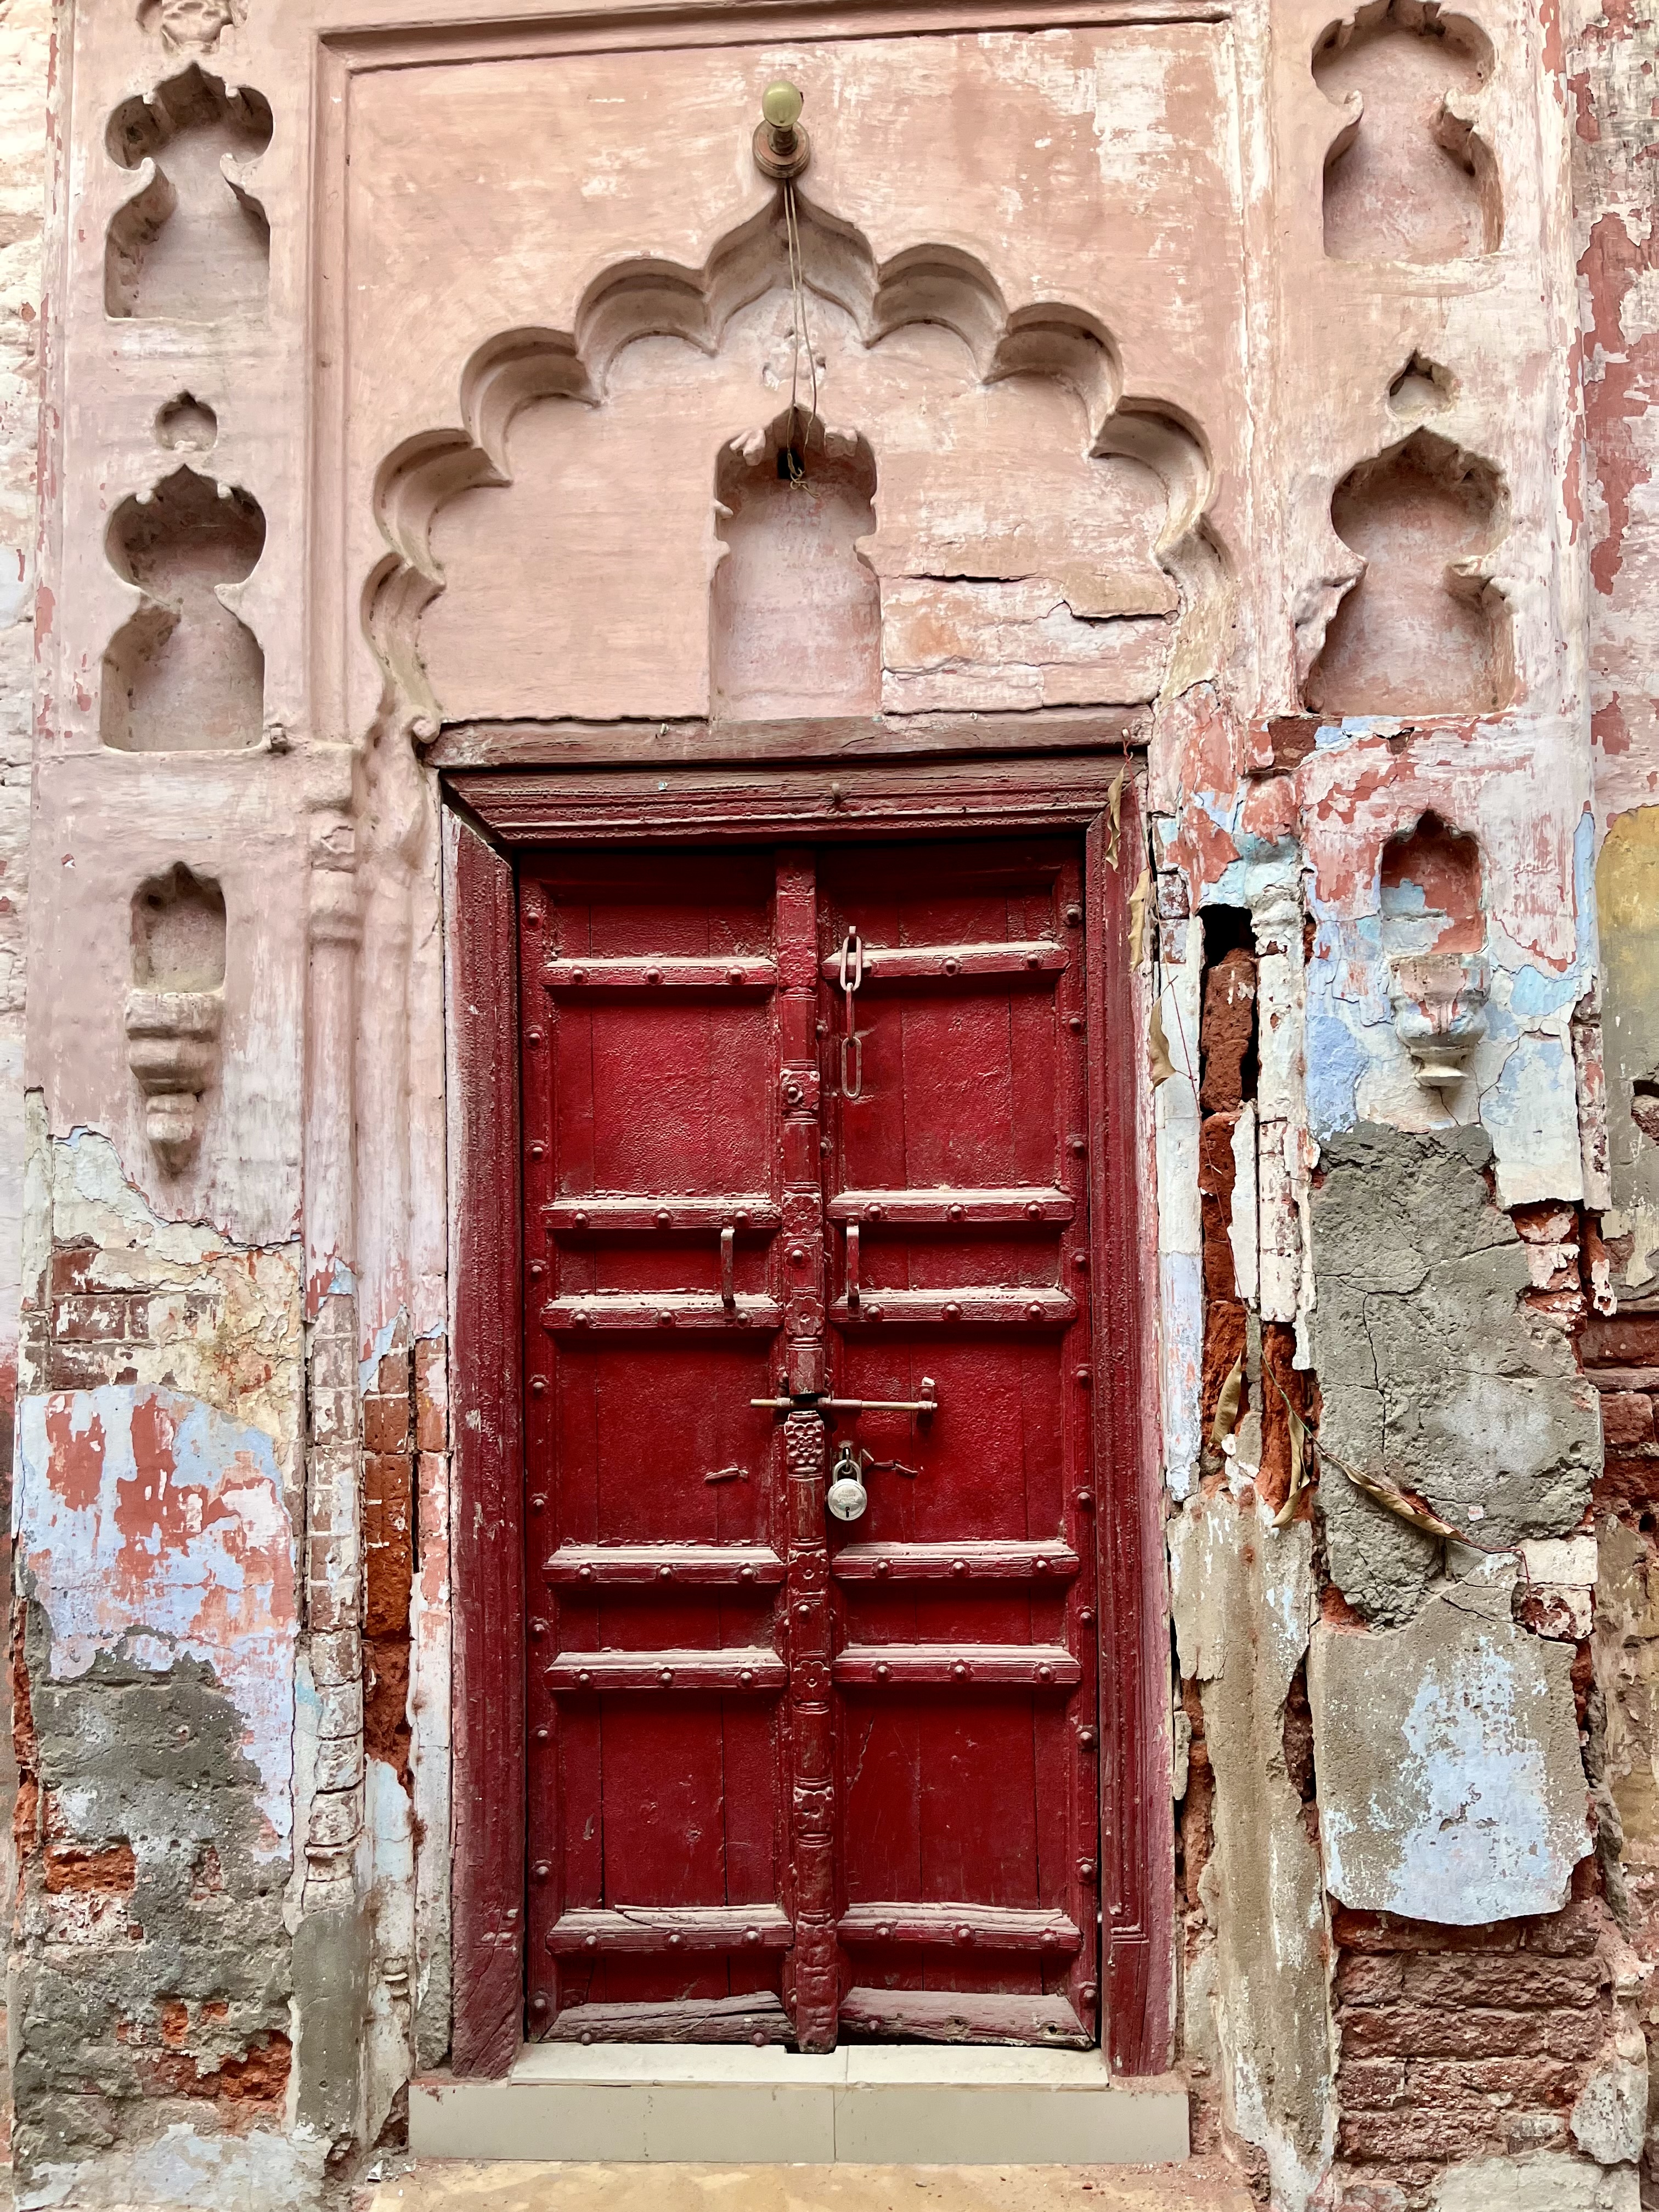 The locked room where the couple stayed in Suhasi's ancestral haveli complex. 